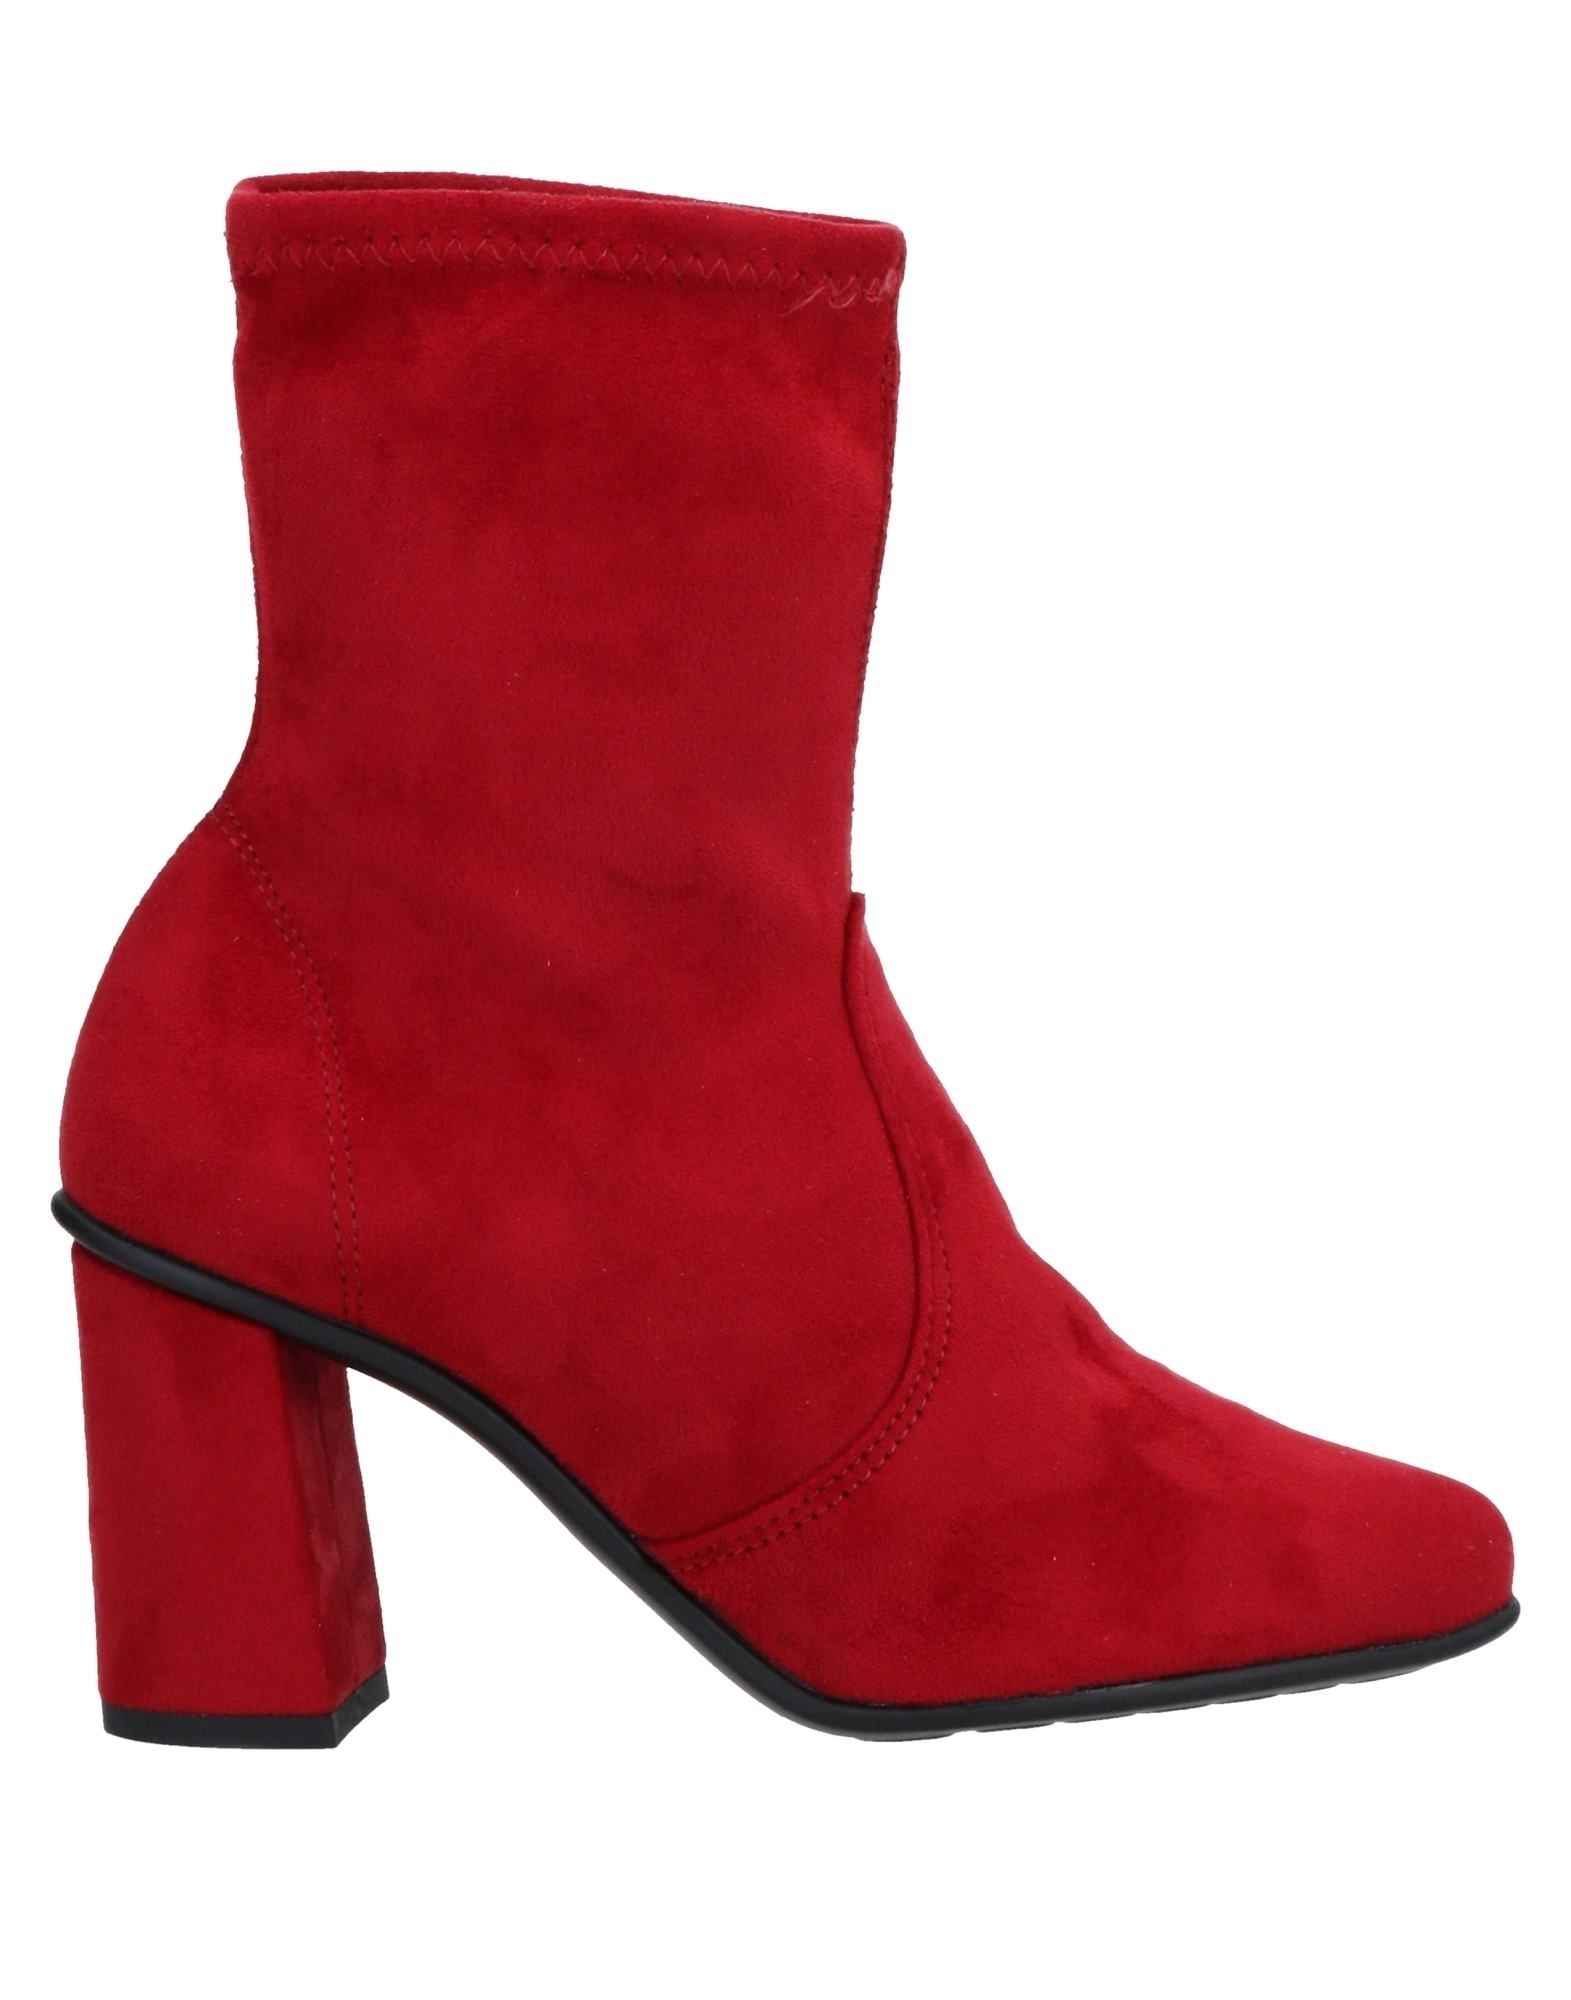 Nr Rapisardi Ankle Boots In Red